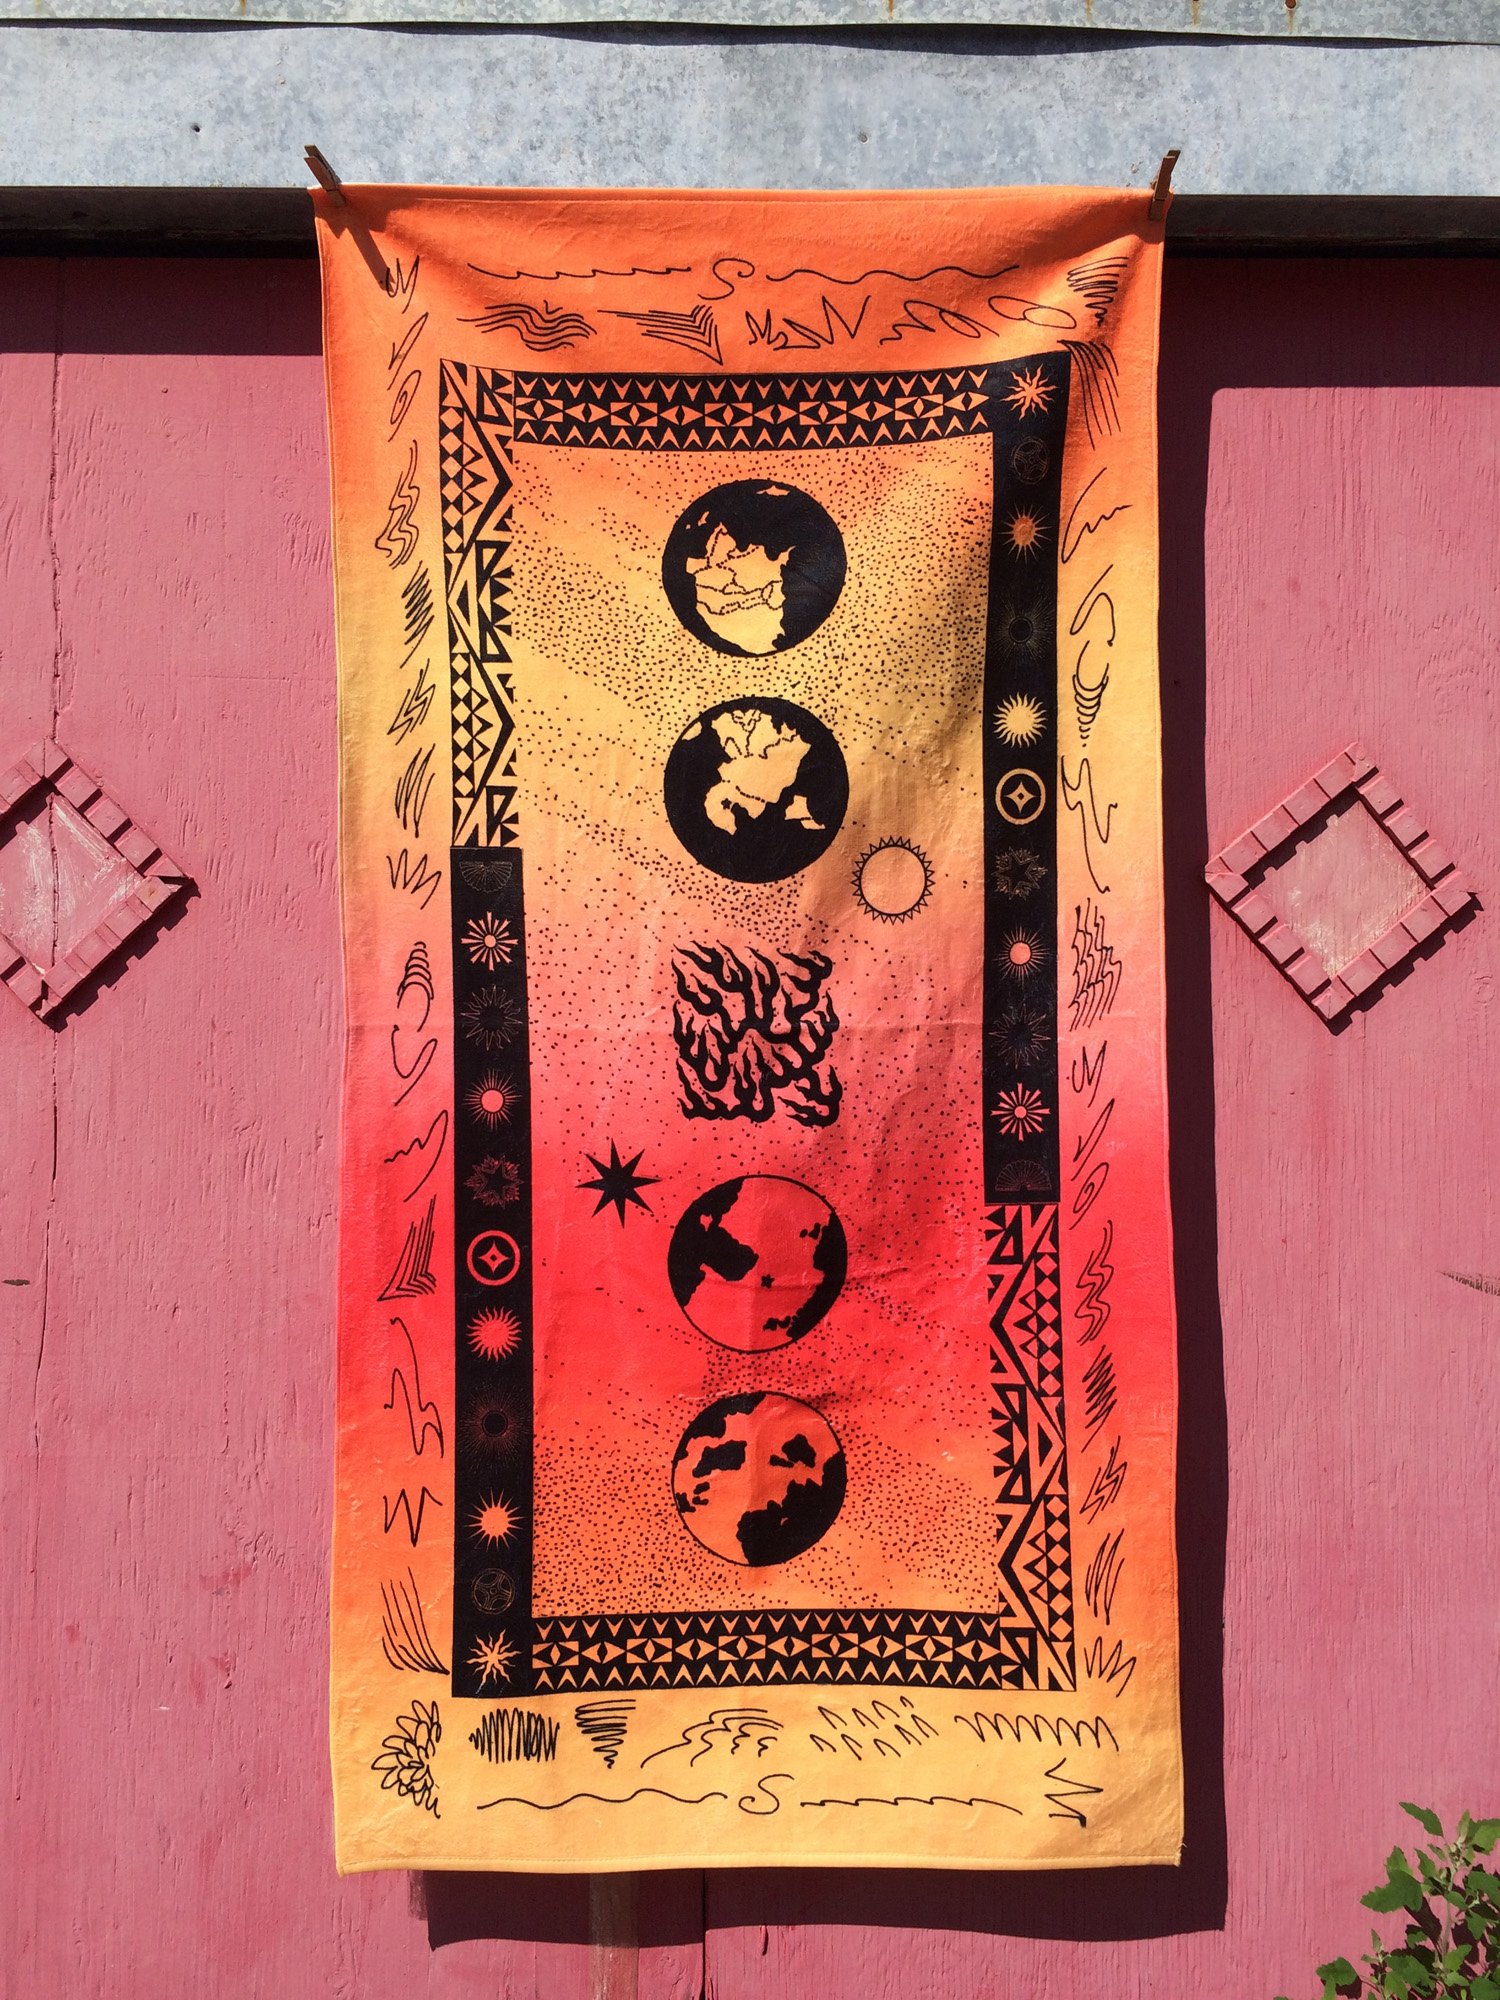  Urras and Anarres Beach Towel  Dye sublimation print on cotton terry  30” x 60”  2021 